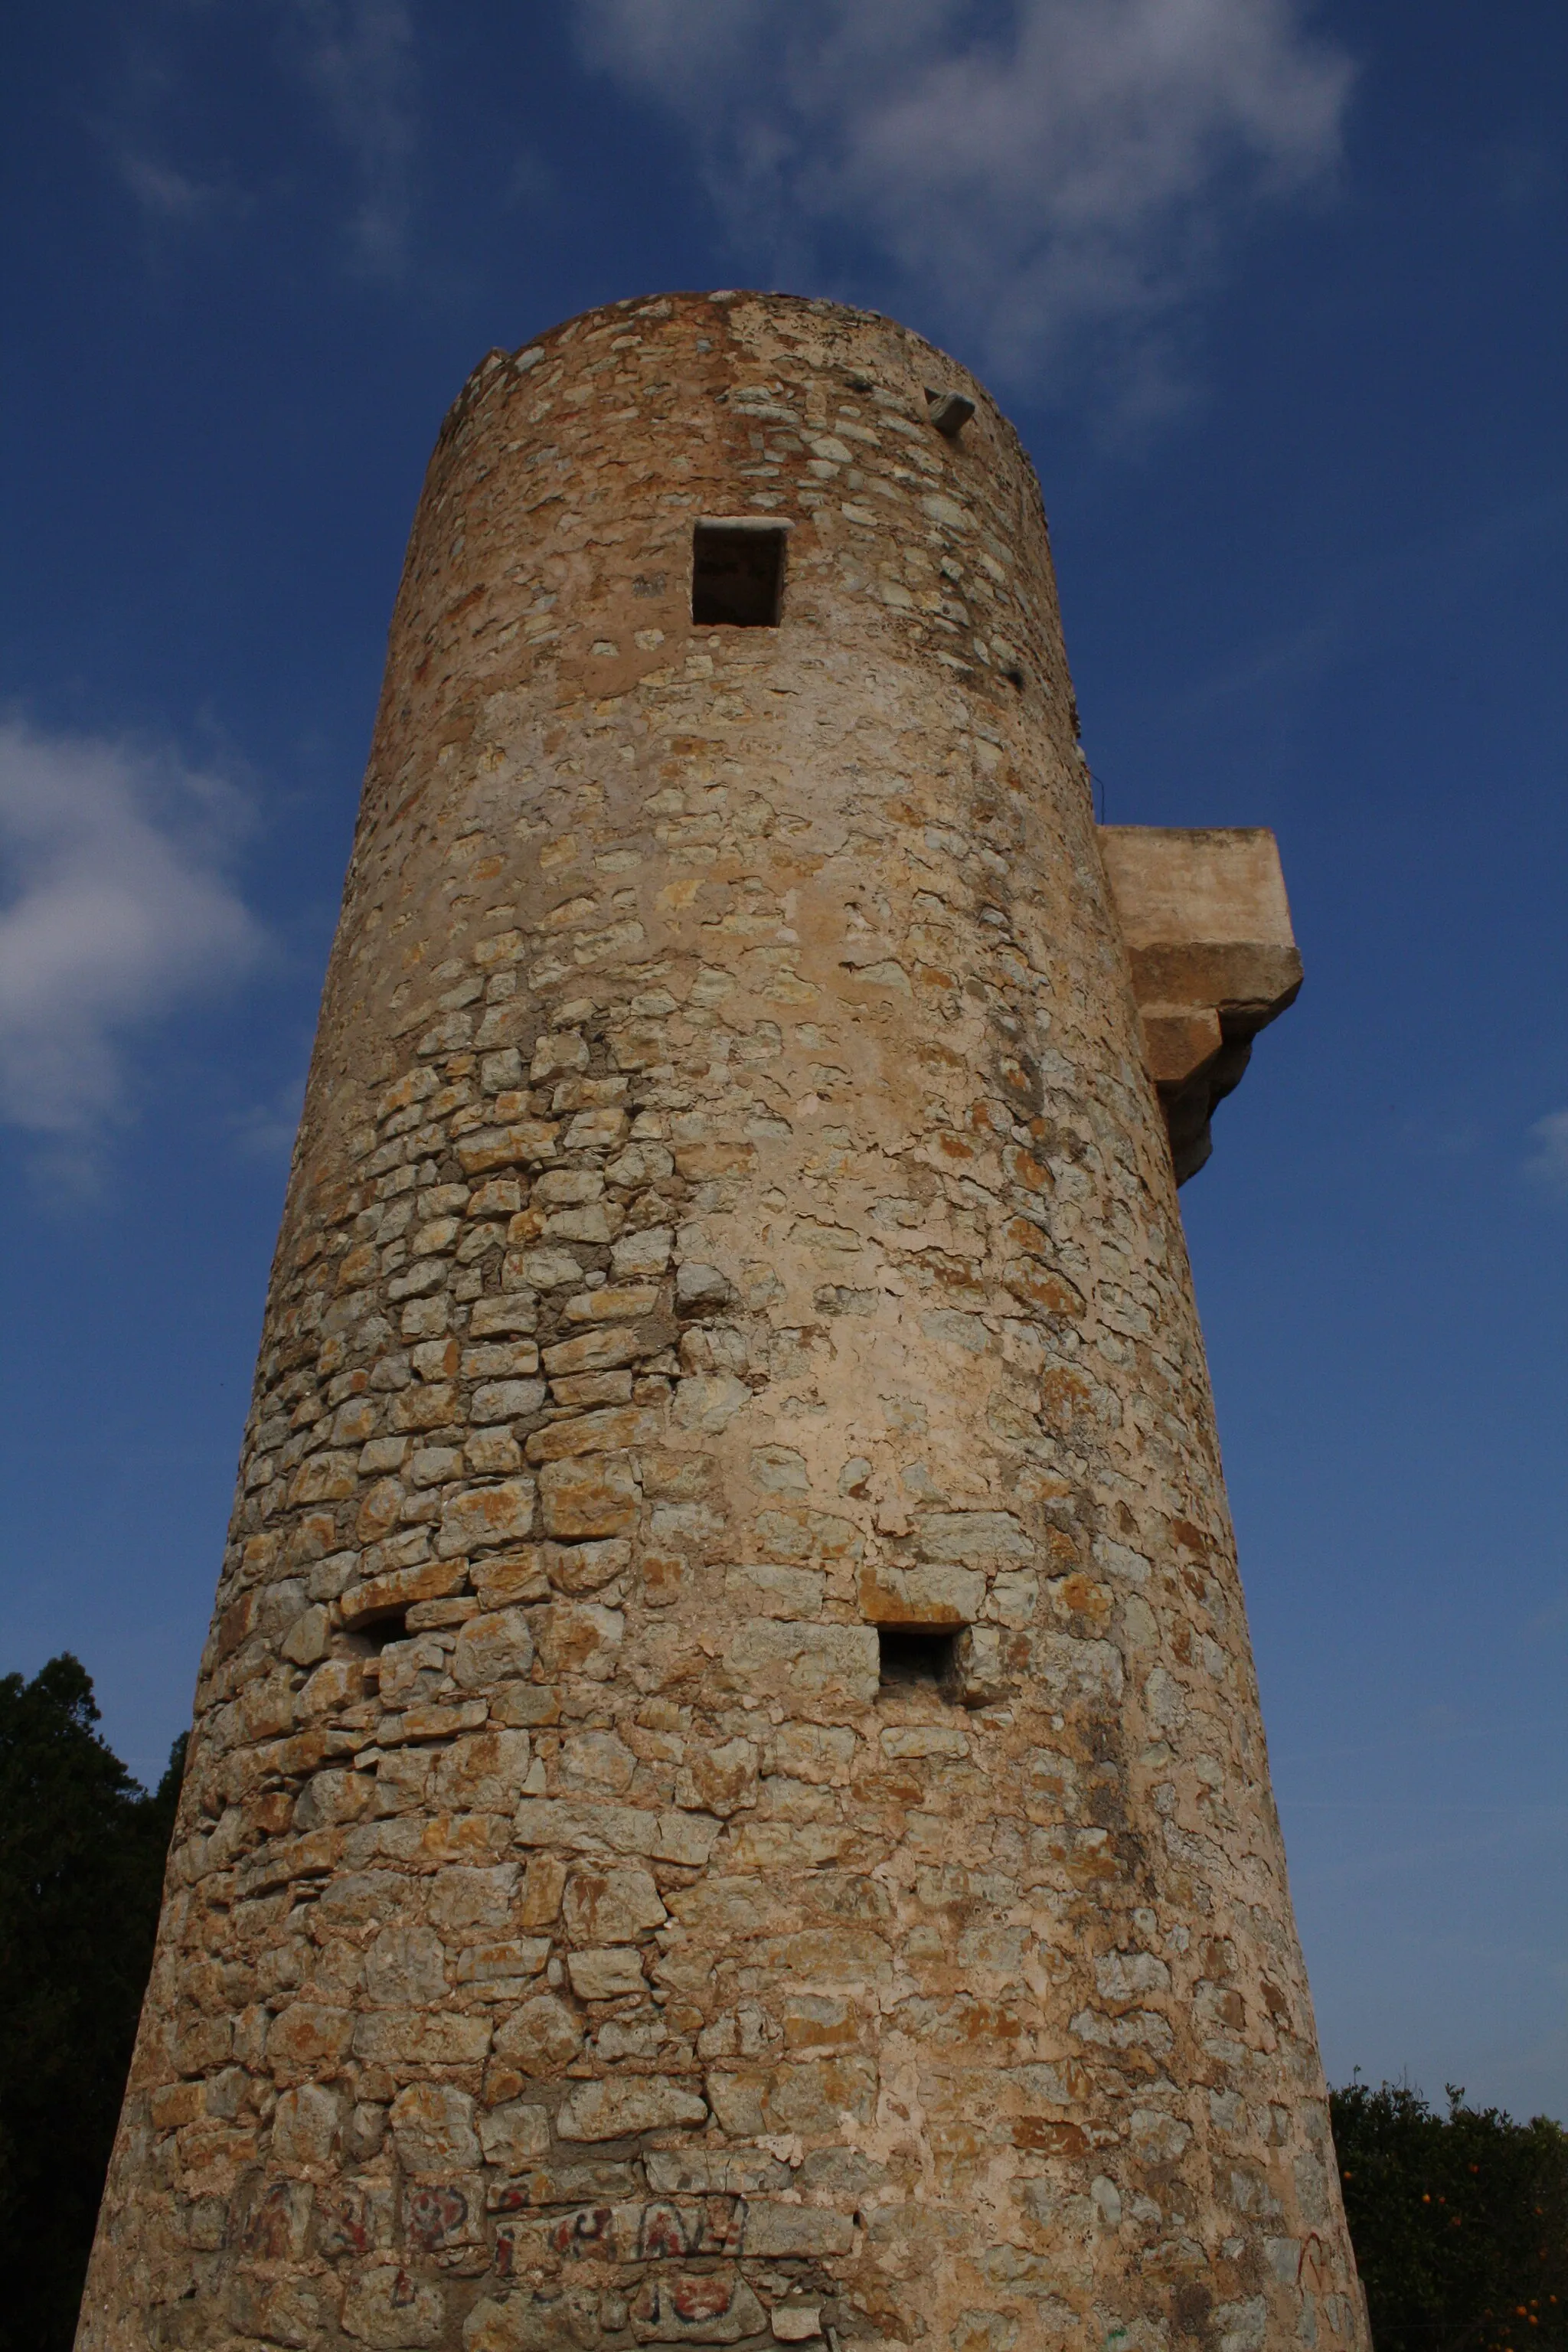 Photo showing: Tavernes de la Valldigna's watchtower, also known as Torre de guaita or Torre de la Vall. It is a registered cultural monument with id number: R-I-51-0010817.